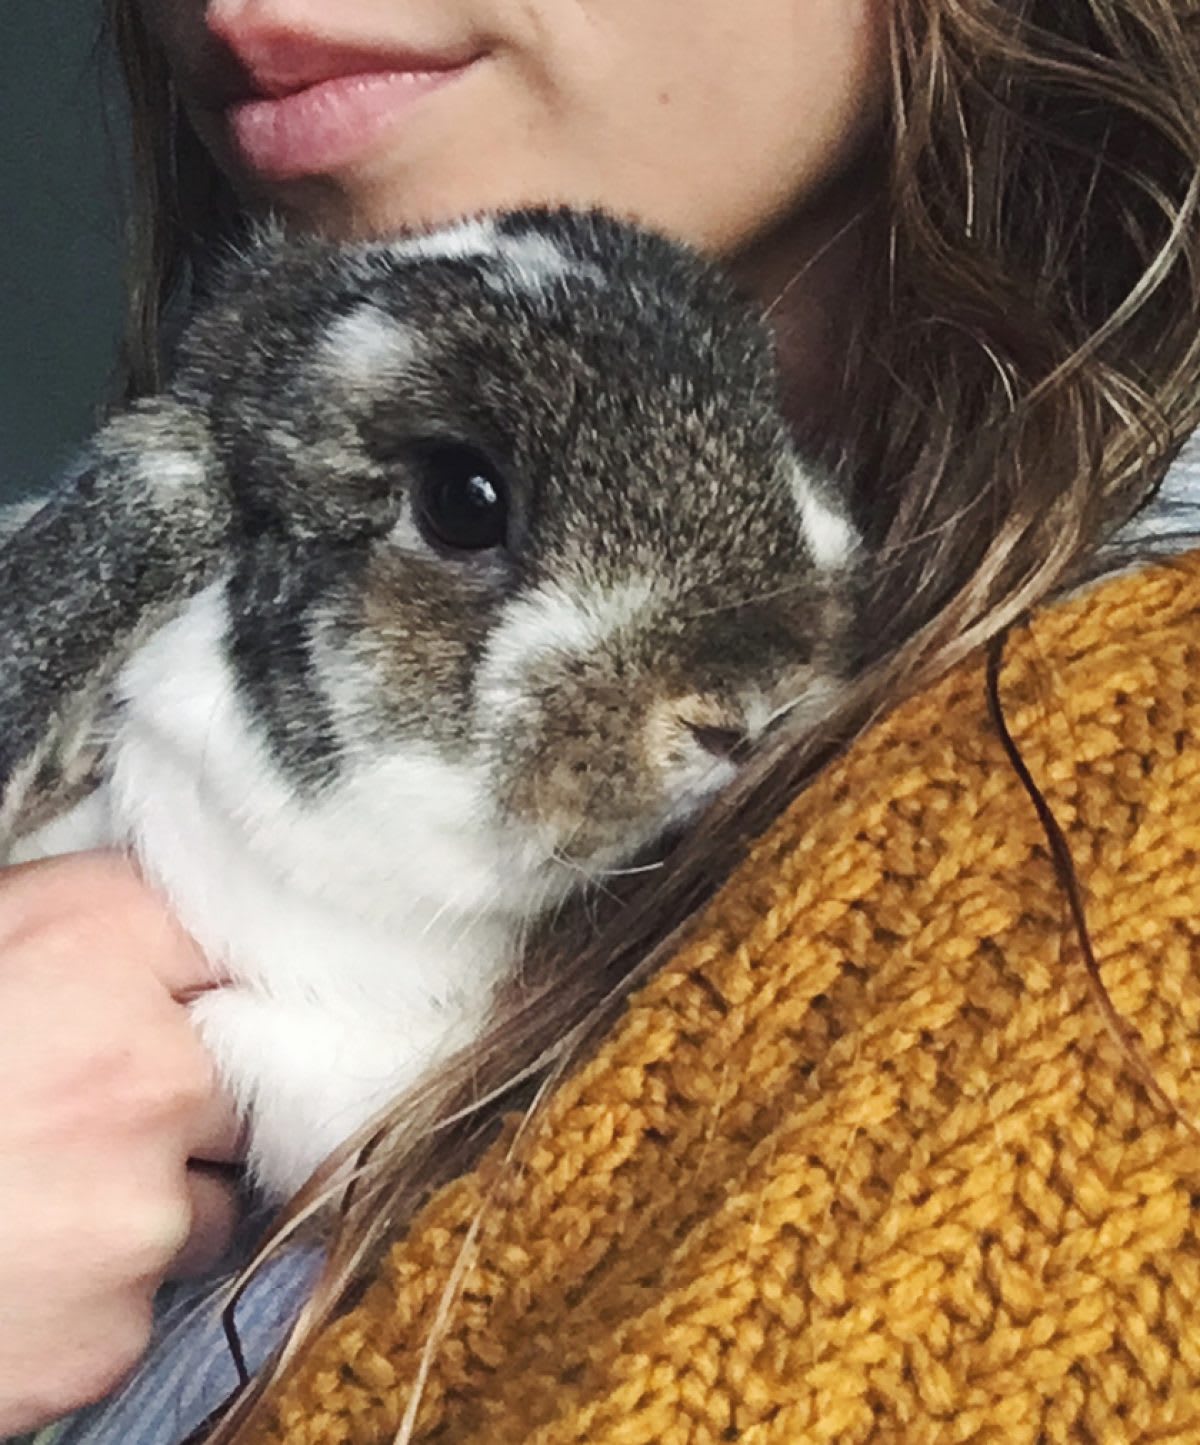 How To Bond With Your Pet Rabbit And Their Enclosure. - The Juicy Mango Media